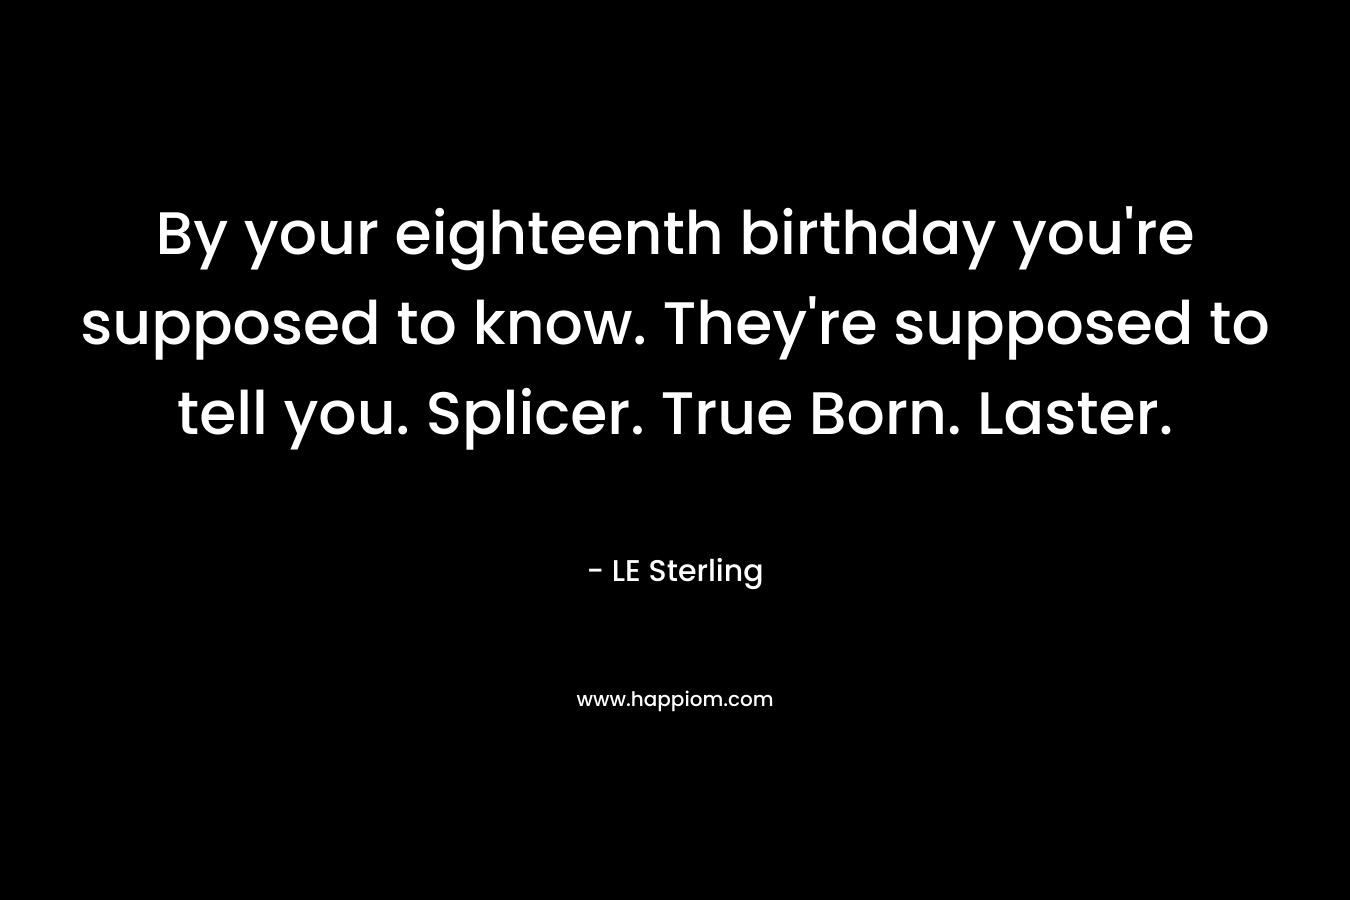 By your eighteenth birthday you're supposed to know. They're supposed to tell you. Splicer. True Born. Laster.